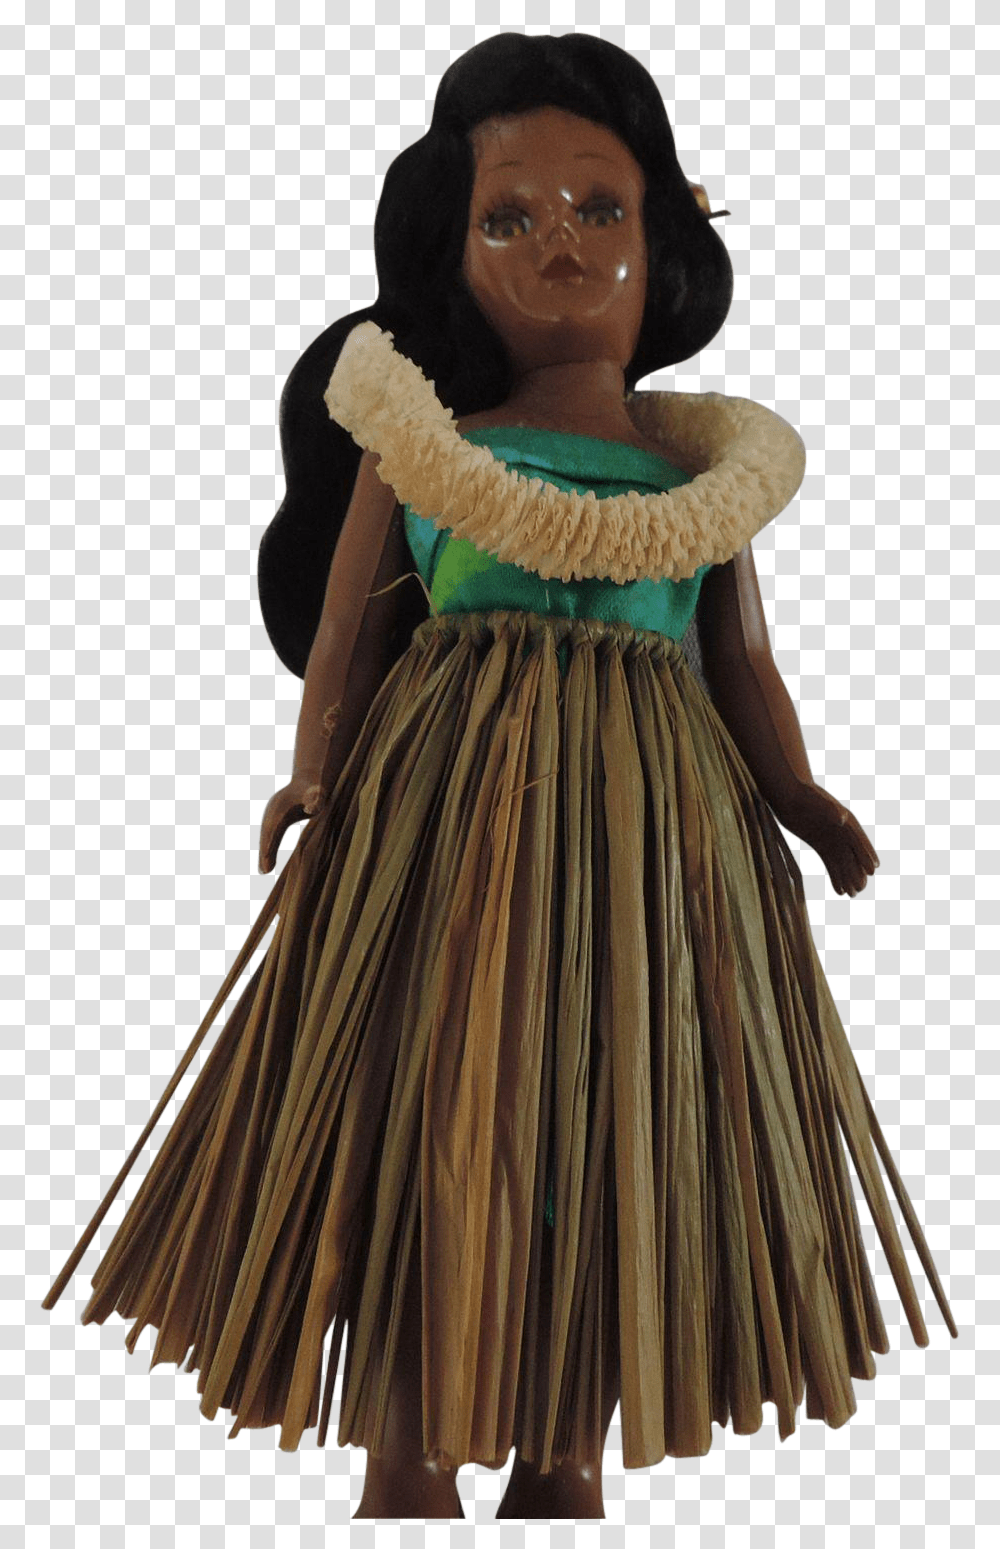 This Hula Girl Hard Plastic Is 7 12 Tall With Black Girl, Apparel, Toy, Doll Transparent Png